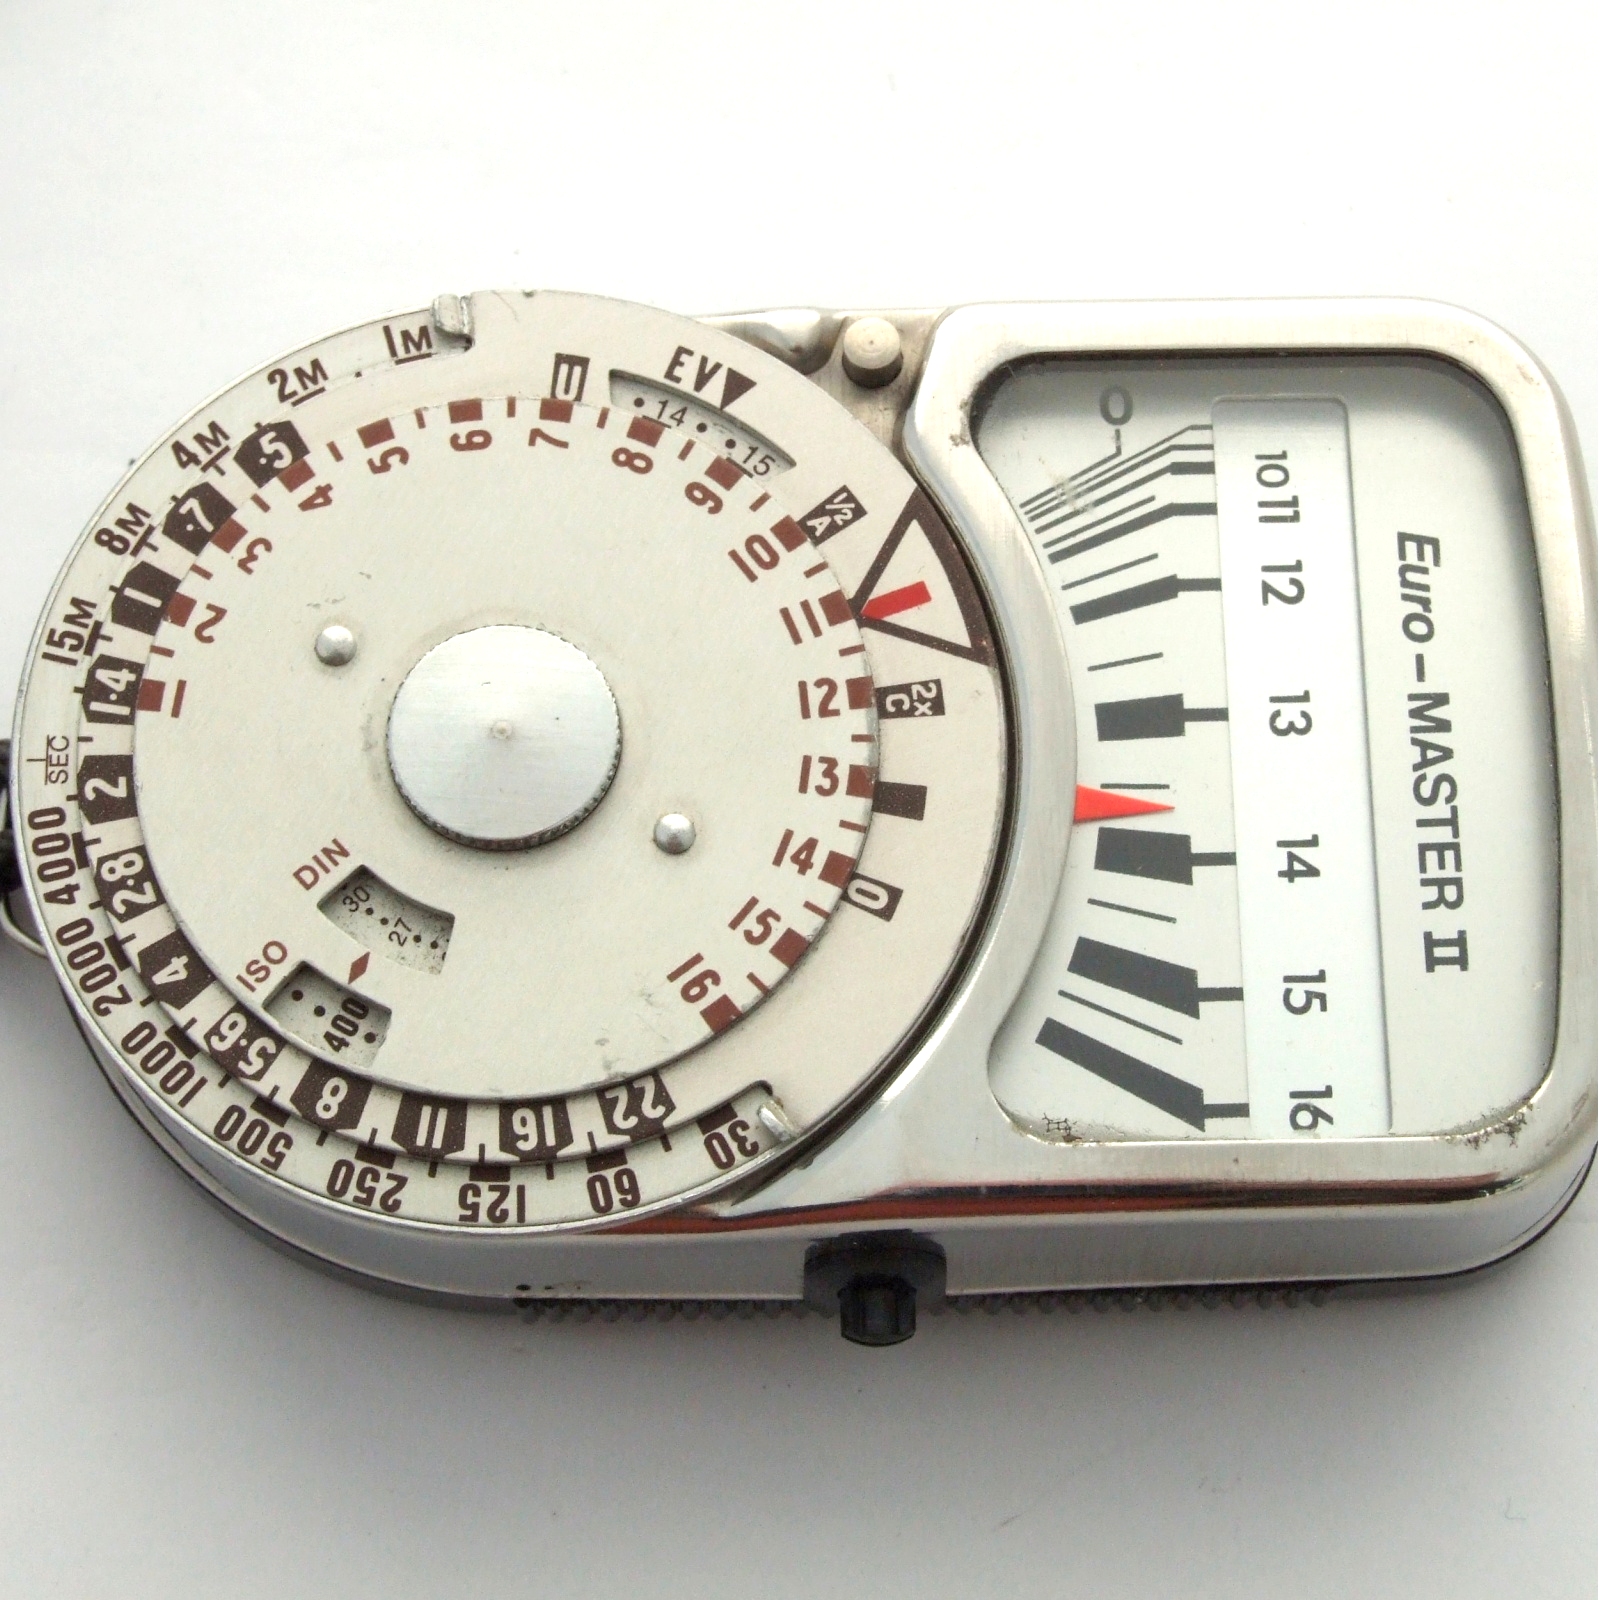 Invercone for Weston IV/V/Euromaster/Euromaster II Light Meters 